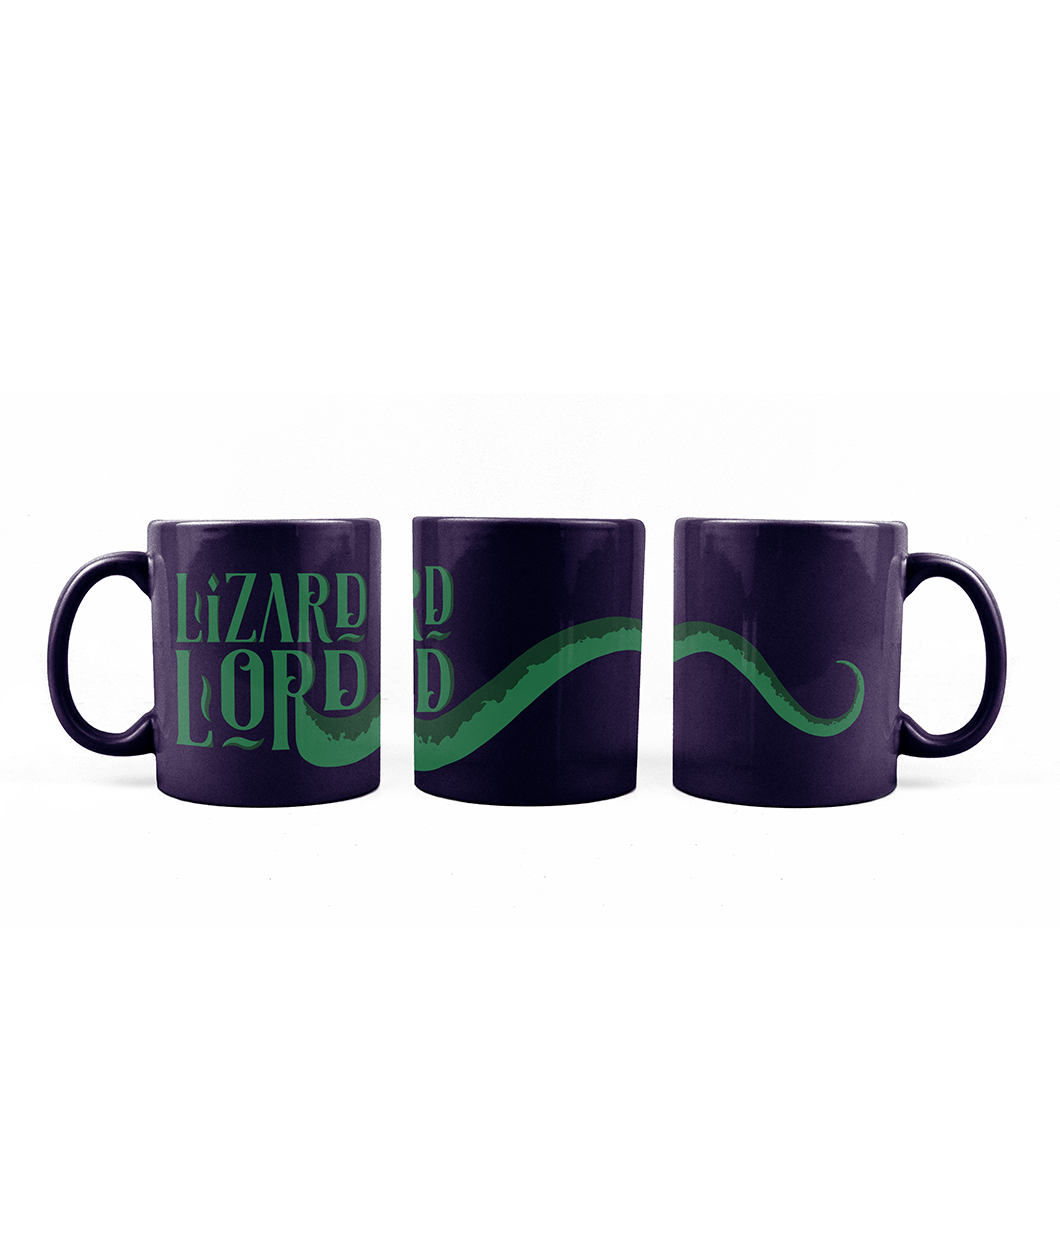 Three deep purple mugs are lined up to show all sides of the same mug. On the first mug are the words 